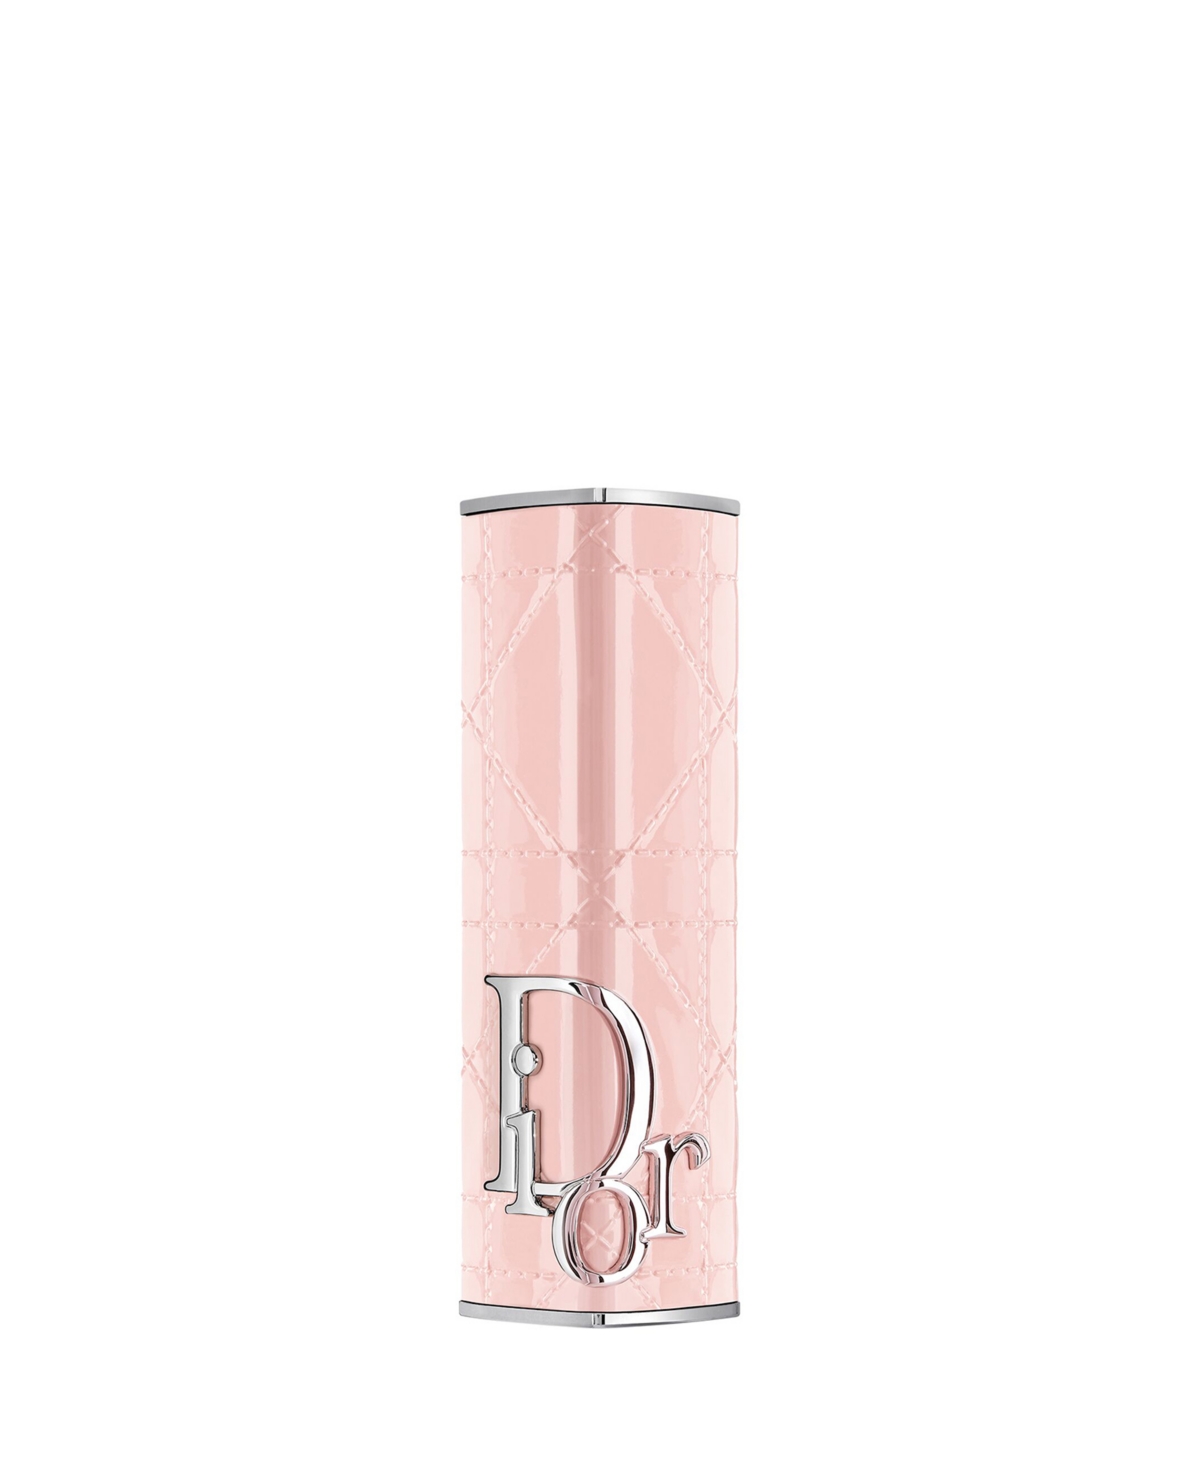 Dior Addict Refillable Couture Lipstick Case In Pink Cannage